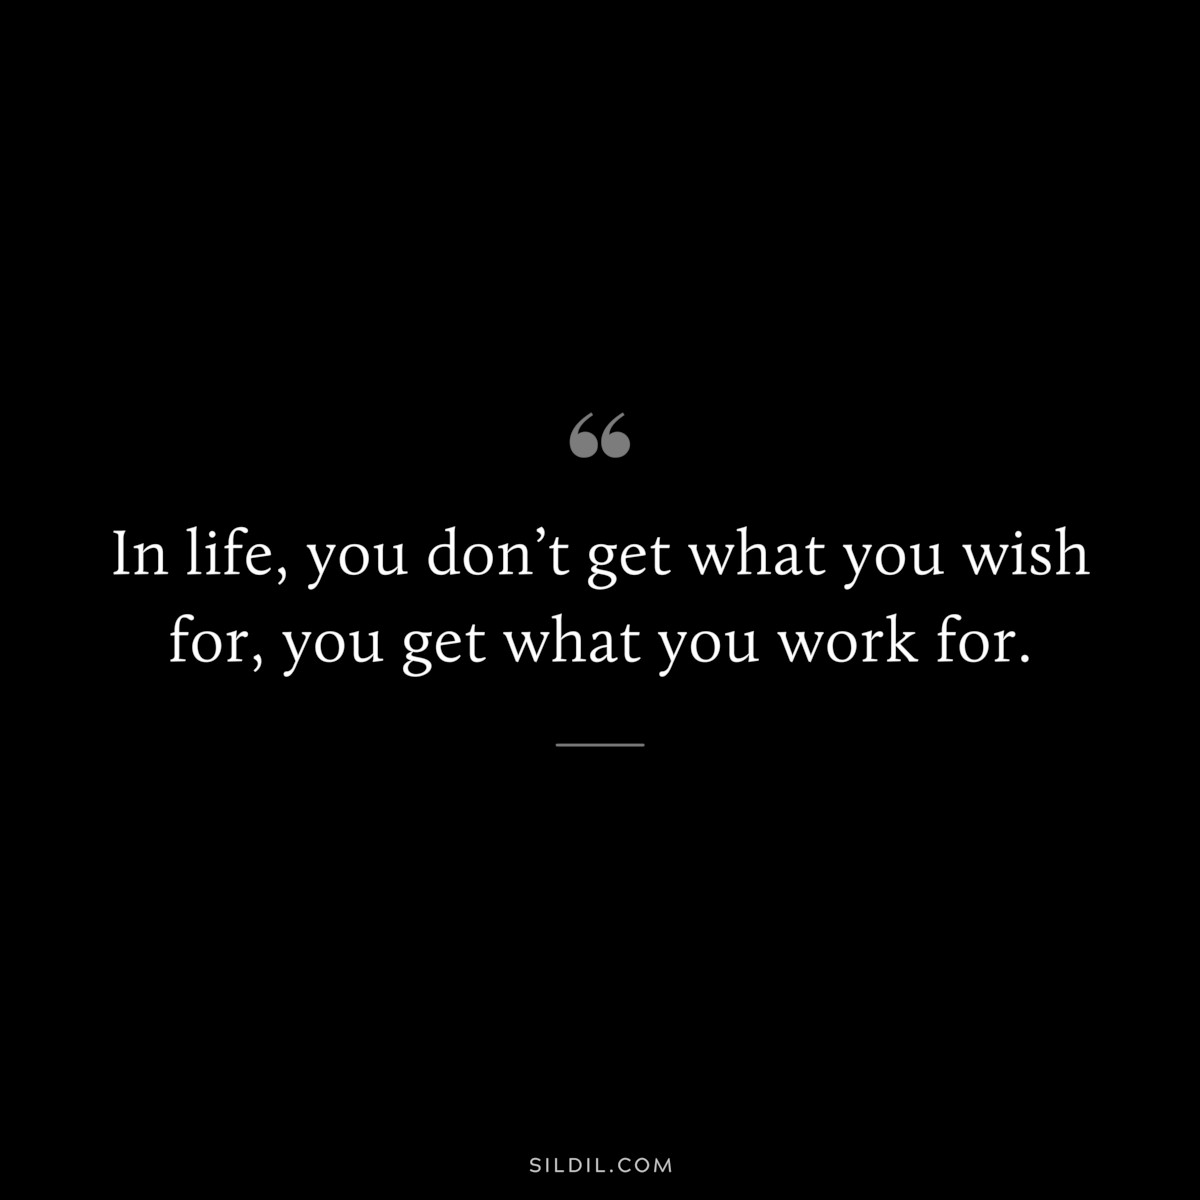 In life, you don’t get what you wish for, you get what you work for.